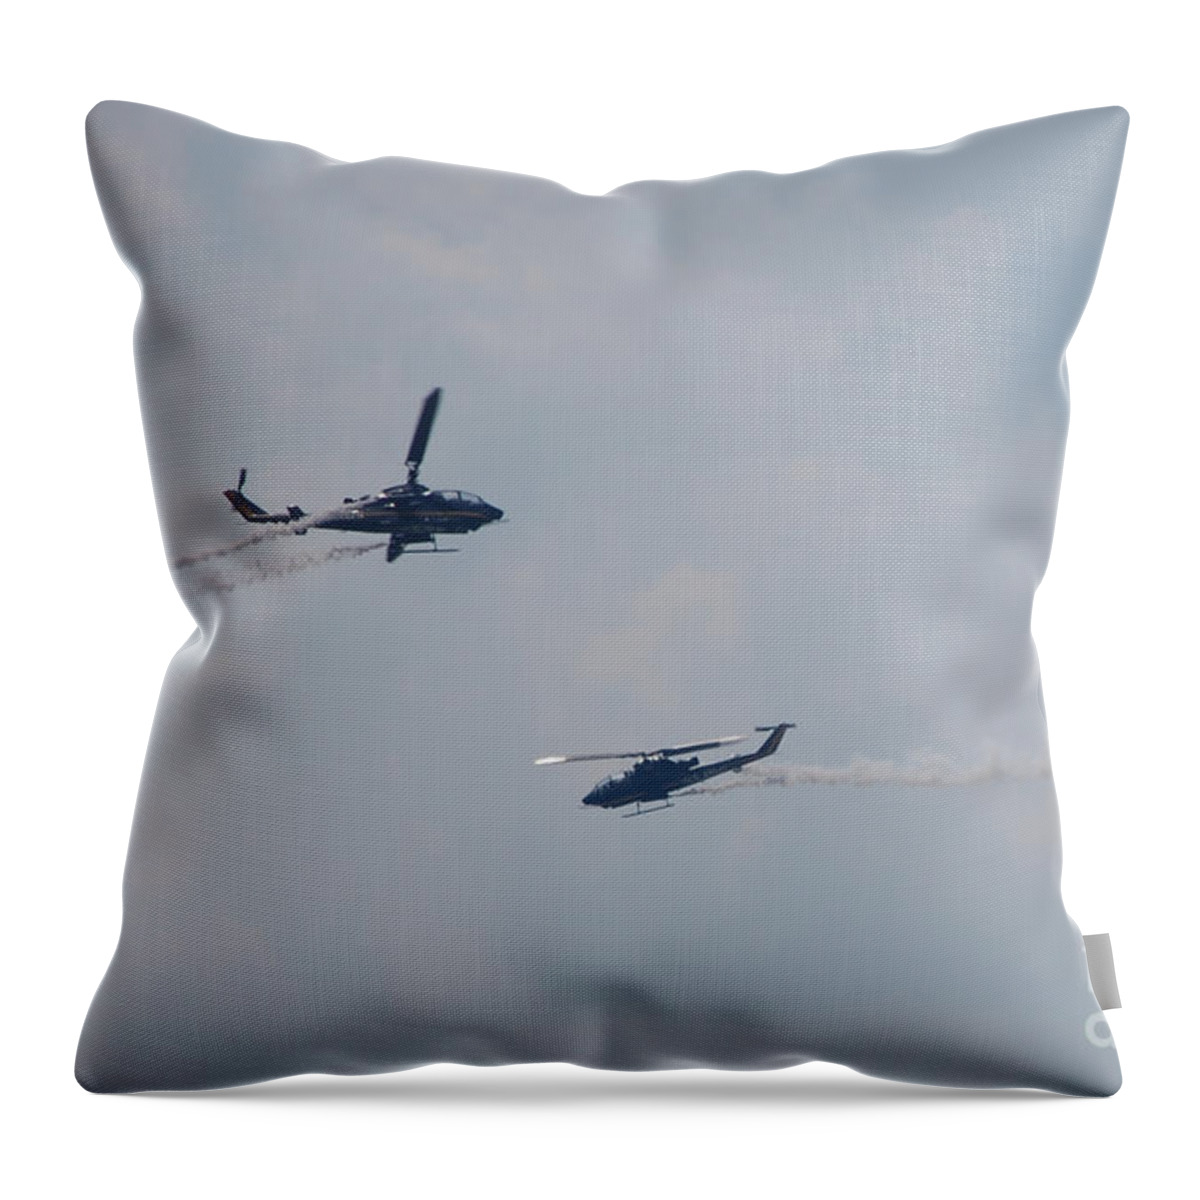 Helicopters Throw Pillow featuring the photograph Two Cobras by Susan Stevens Crosby